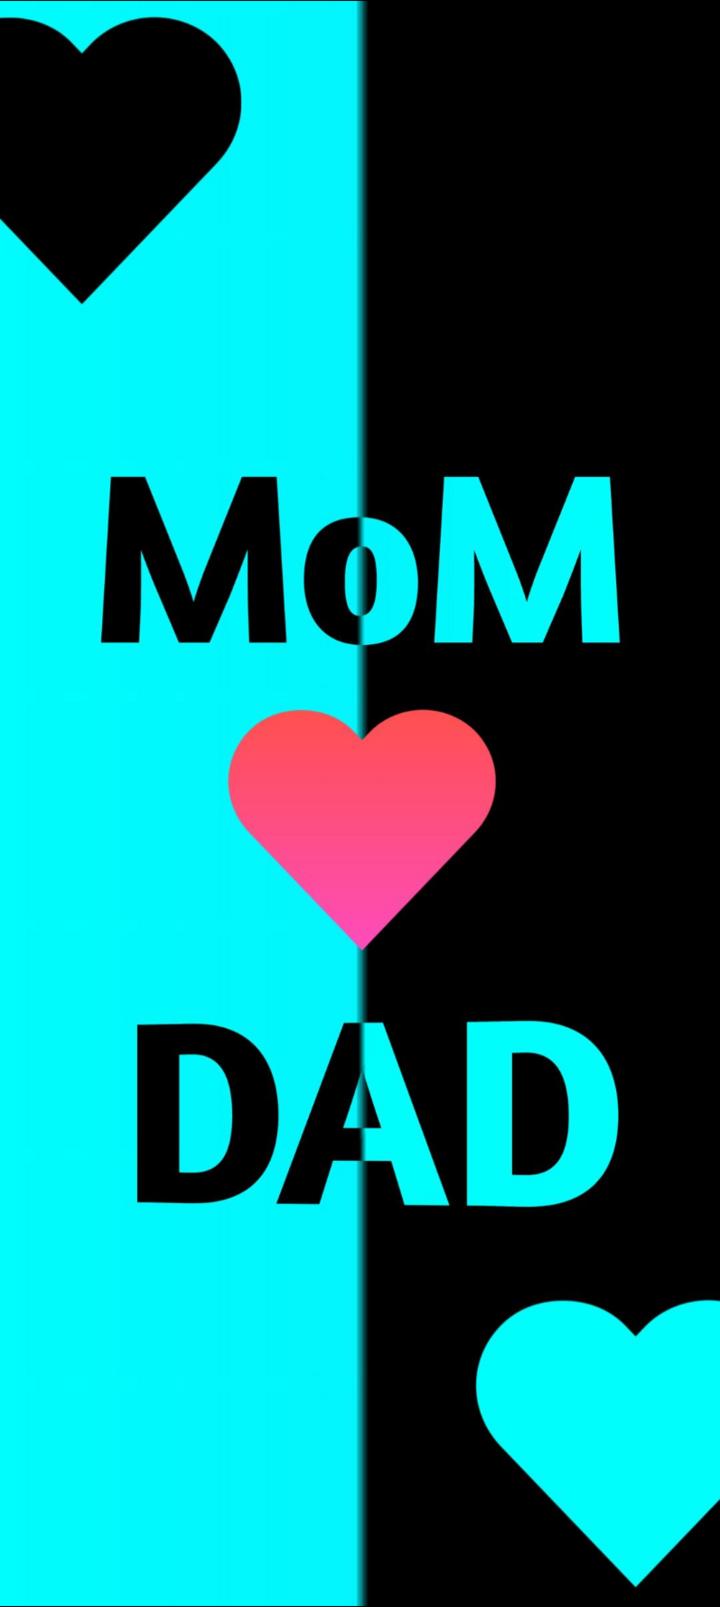 🥰 I love you Maa & Dad Images • 𝙱𝚁𝙾𝙺𝙴𝙽💔 𝙱𝙾𝚈 (@1484795553) on  ShareChat